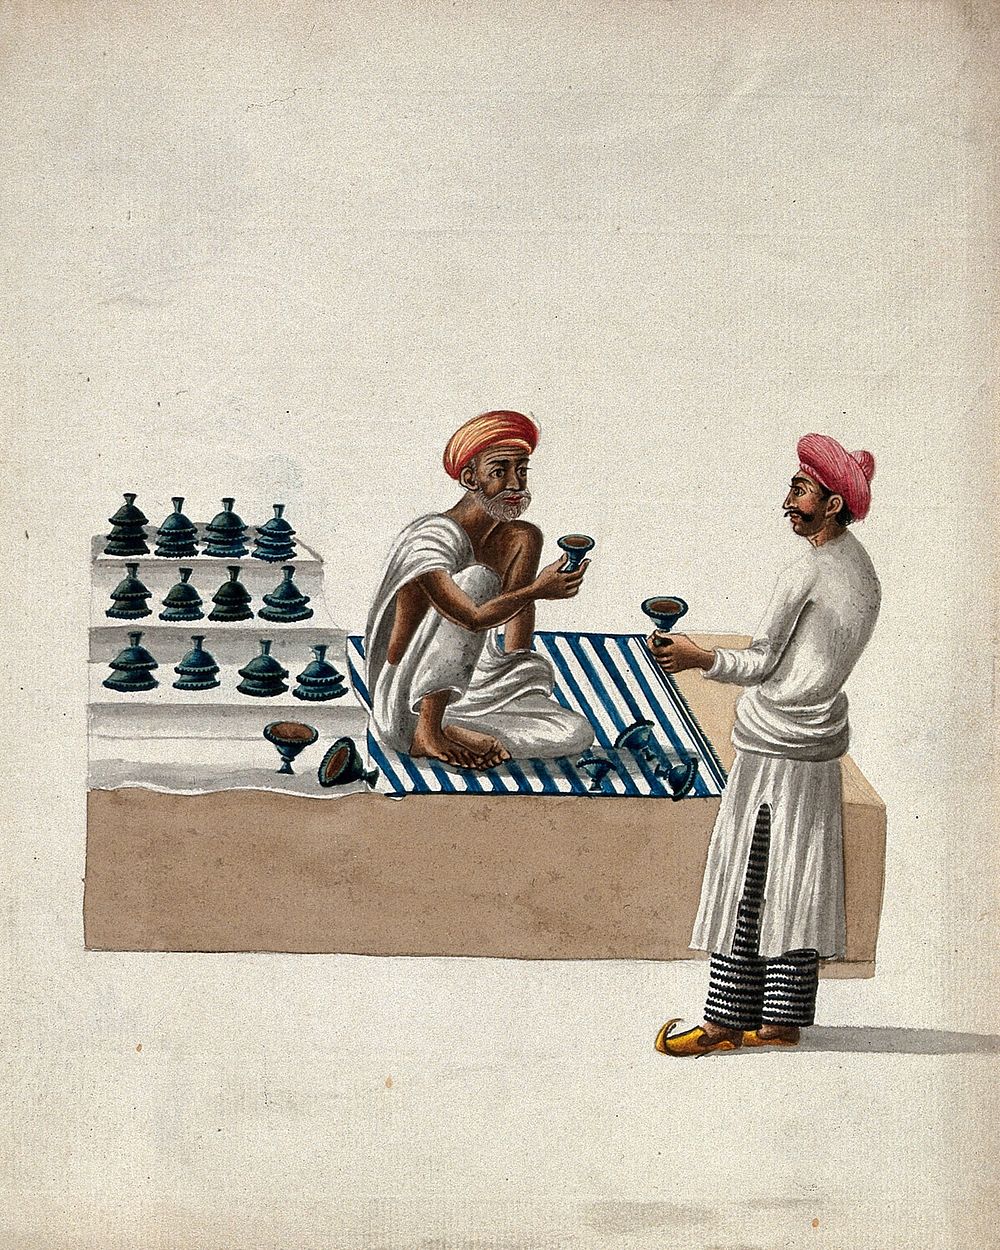 A shopkeeper selling earthen diyas (lamps)  to a man. Gouache painting by an Indian artist.